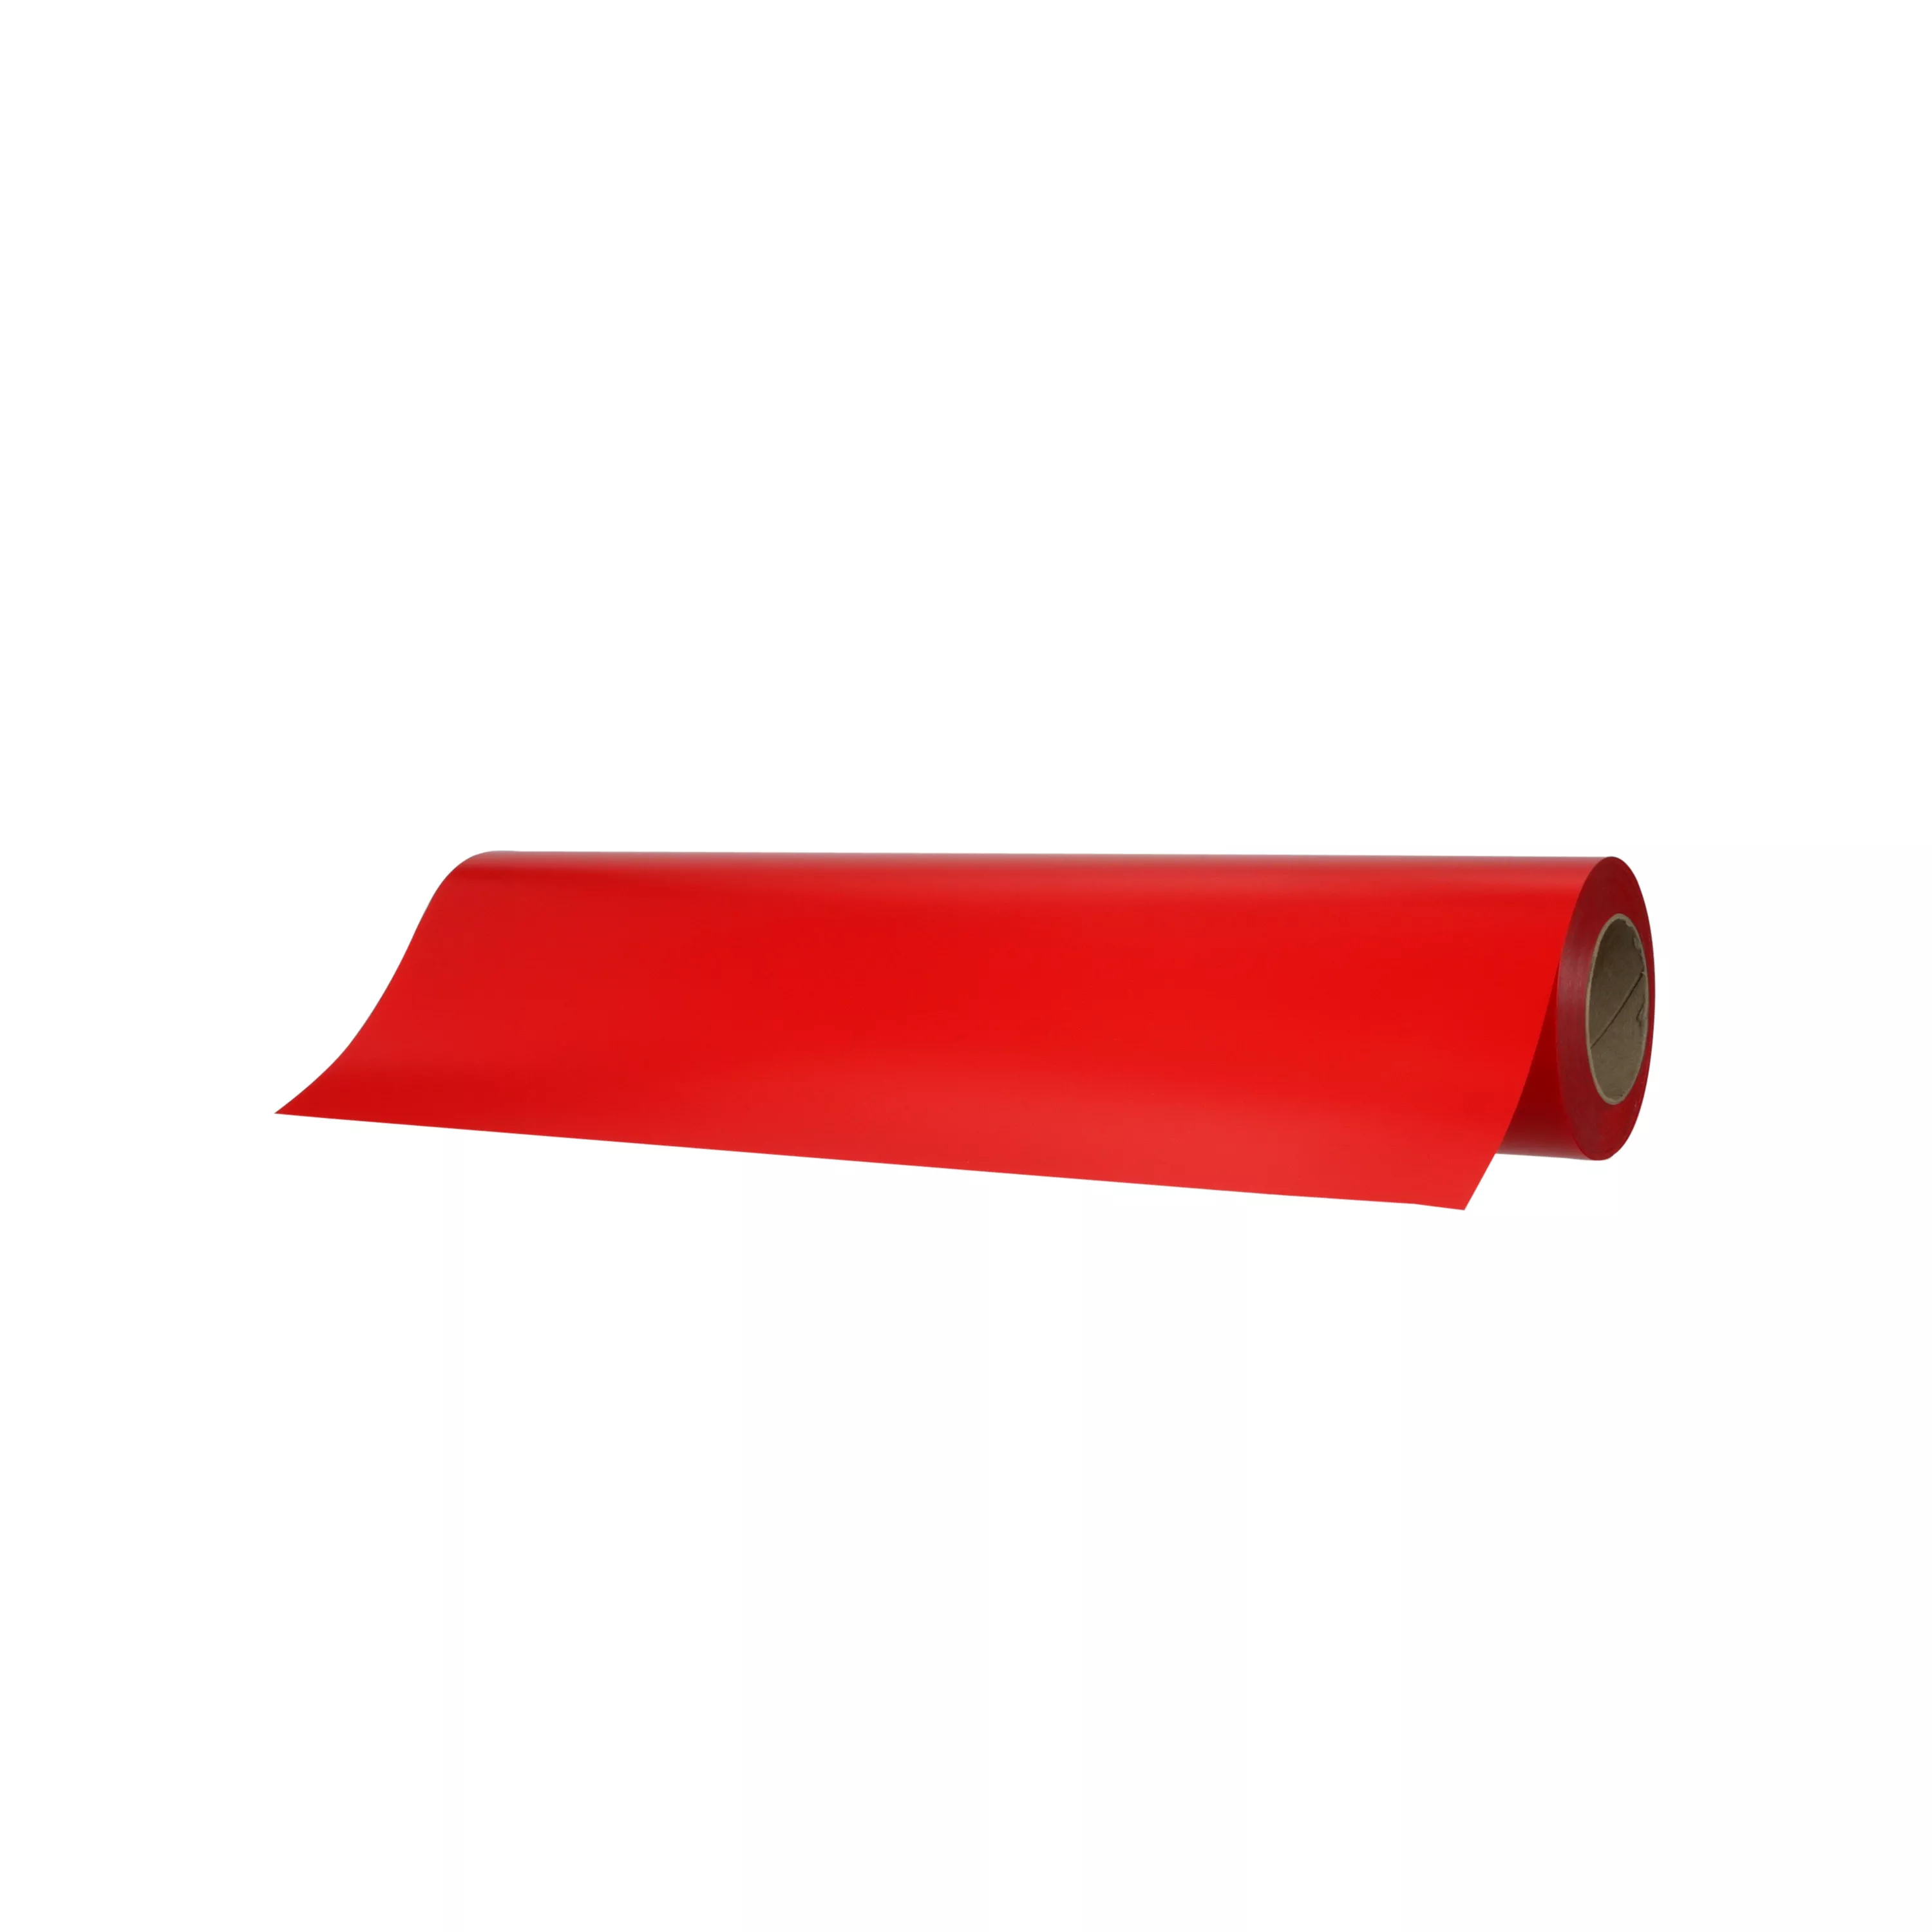 3M™ Scotchcal™ Translucent Graphic Film 3630-93, Fire Engine Red, 48 in
x 50 yd, 1 Roll/Case